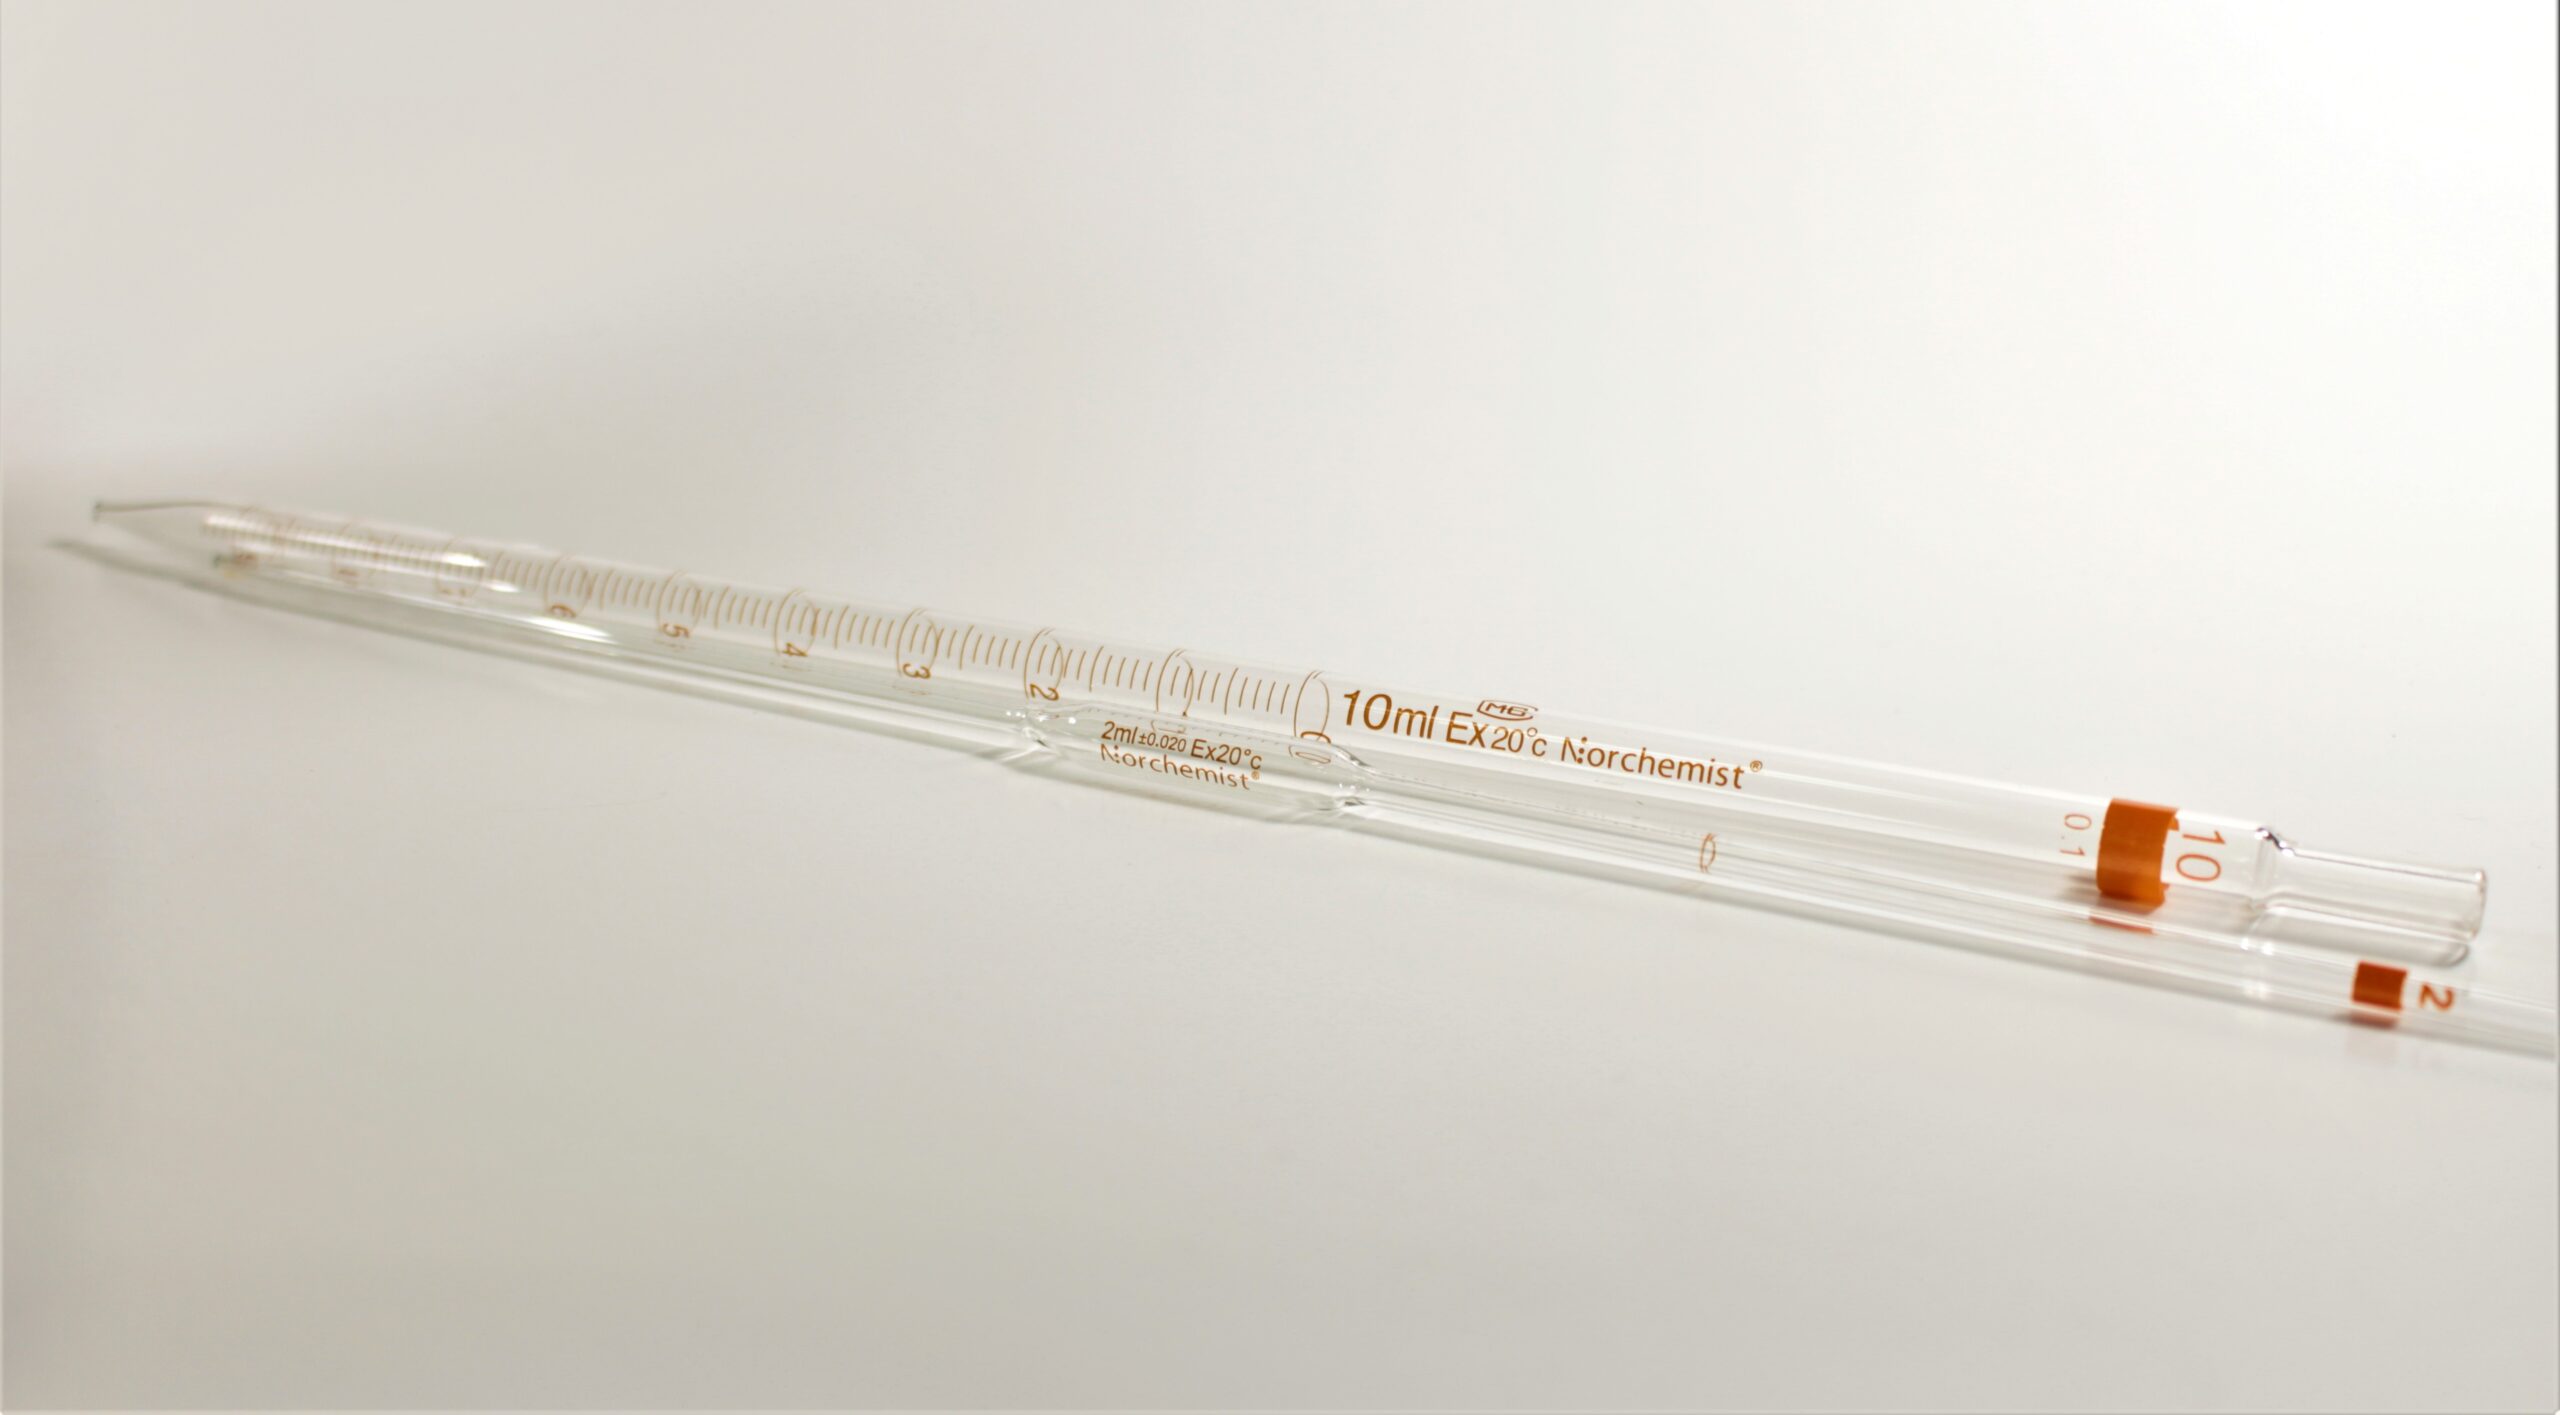 Pipette 23.6.13 download the last version for mac